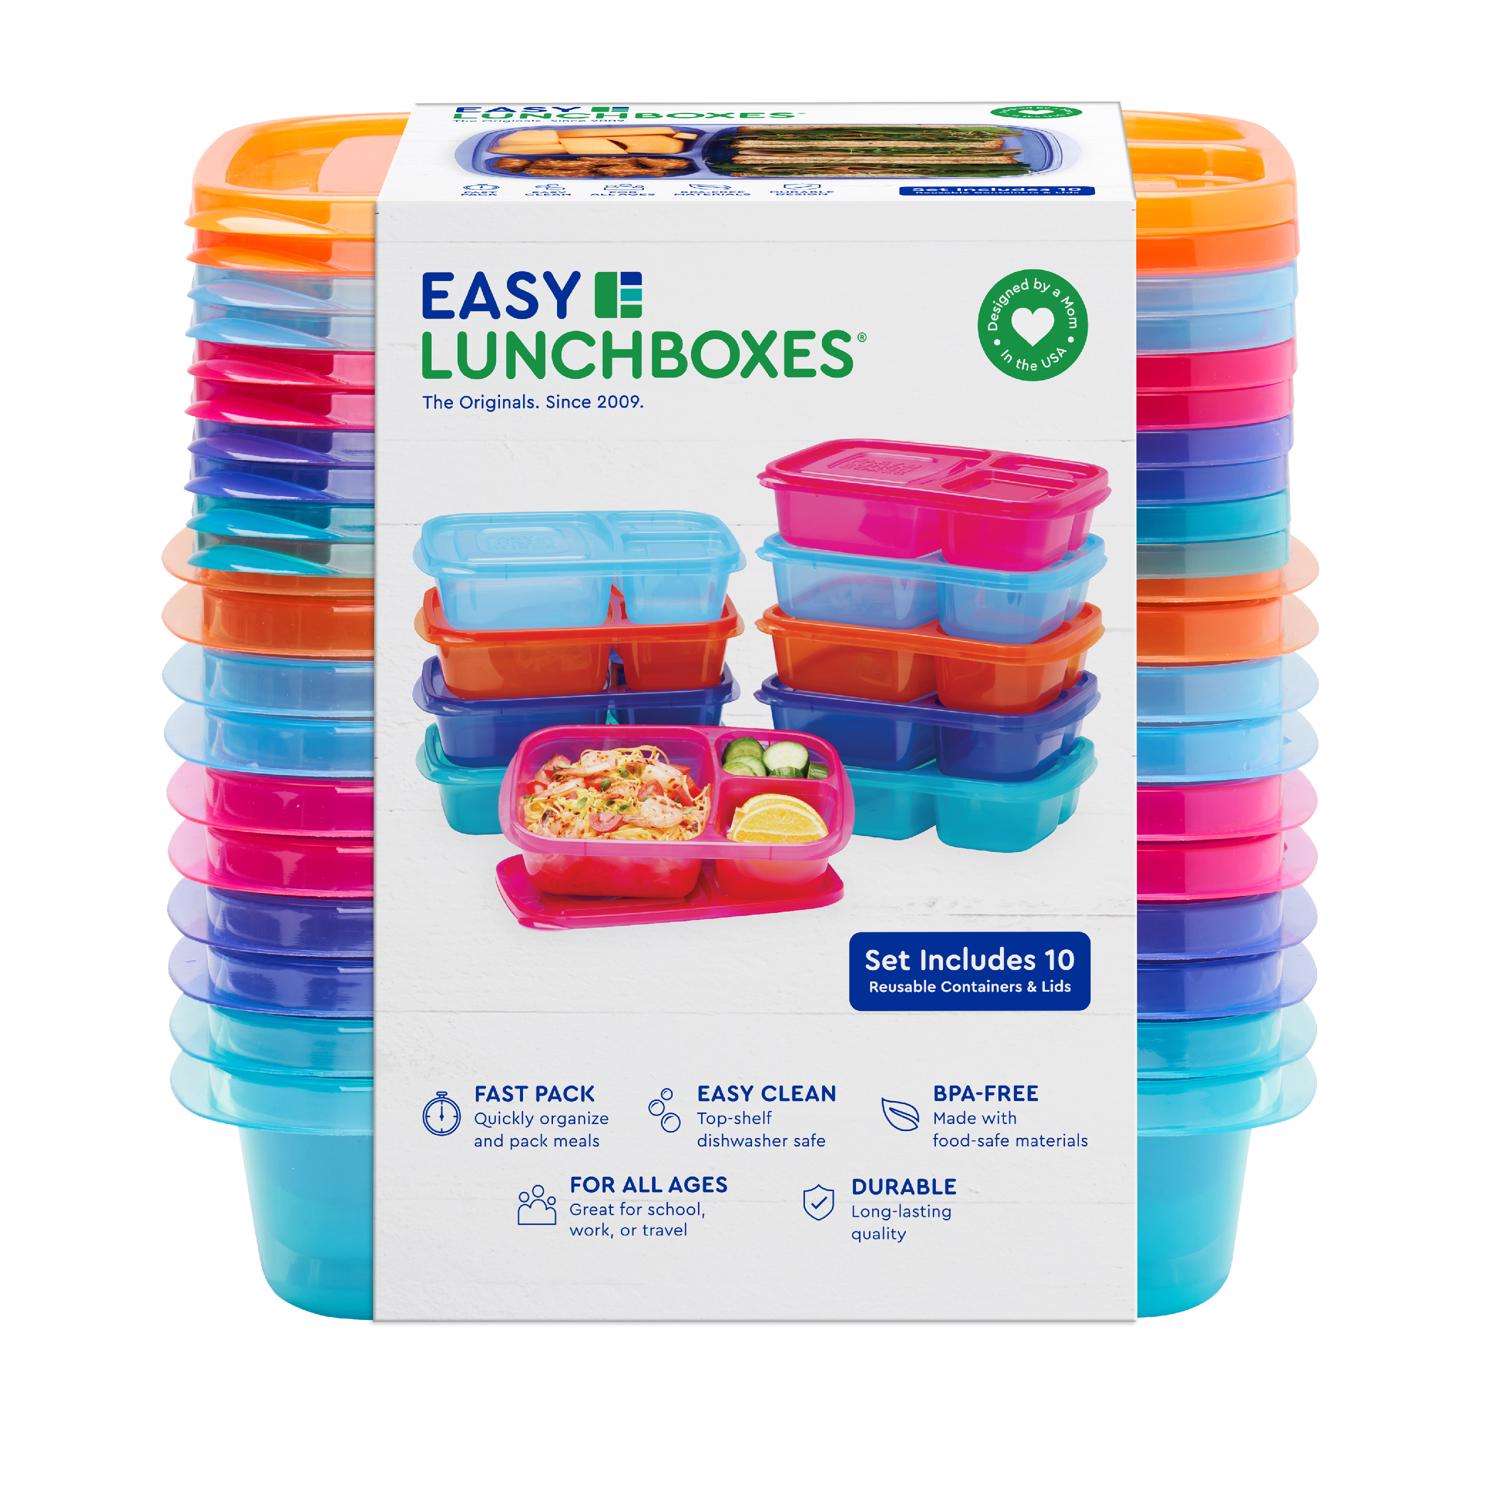 Easylunchboxes 3-Compartment Bento Lunch Box Containers Set of 4 Brights